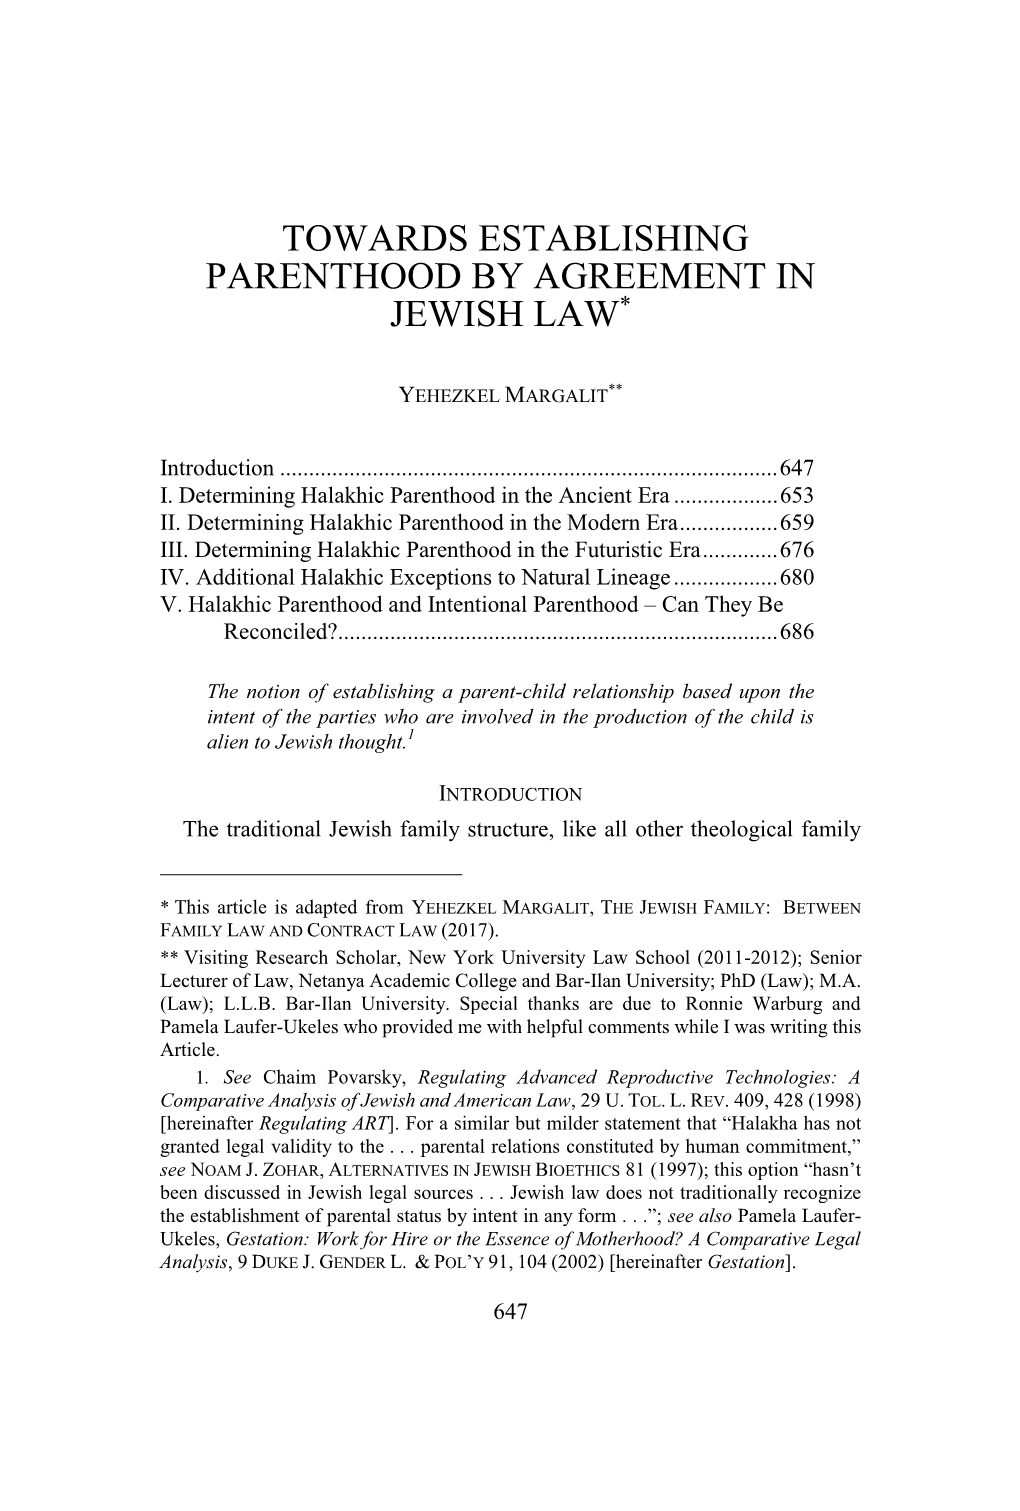 Towards Establishing Parenthood by Agreement in Jewish Law*